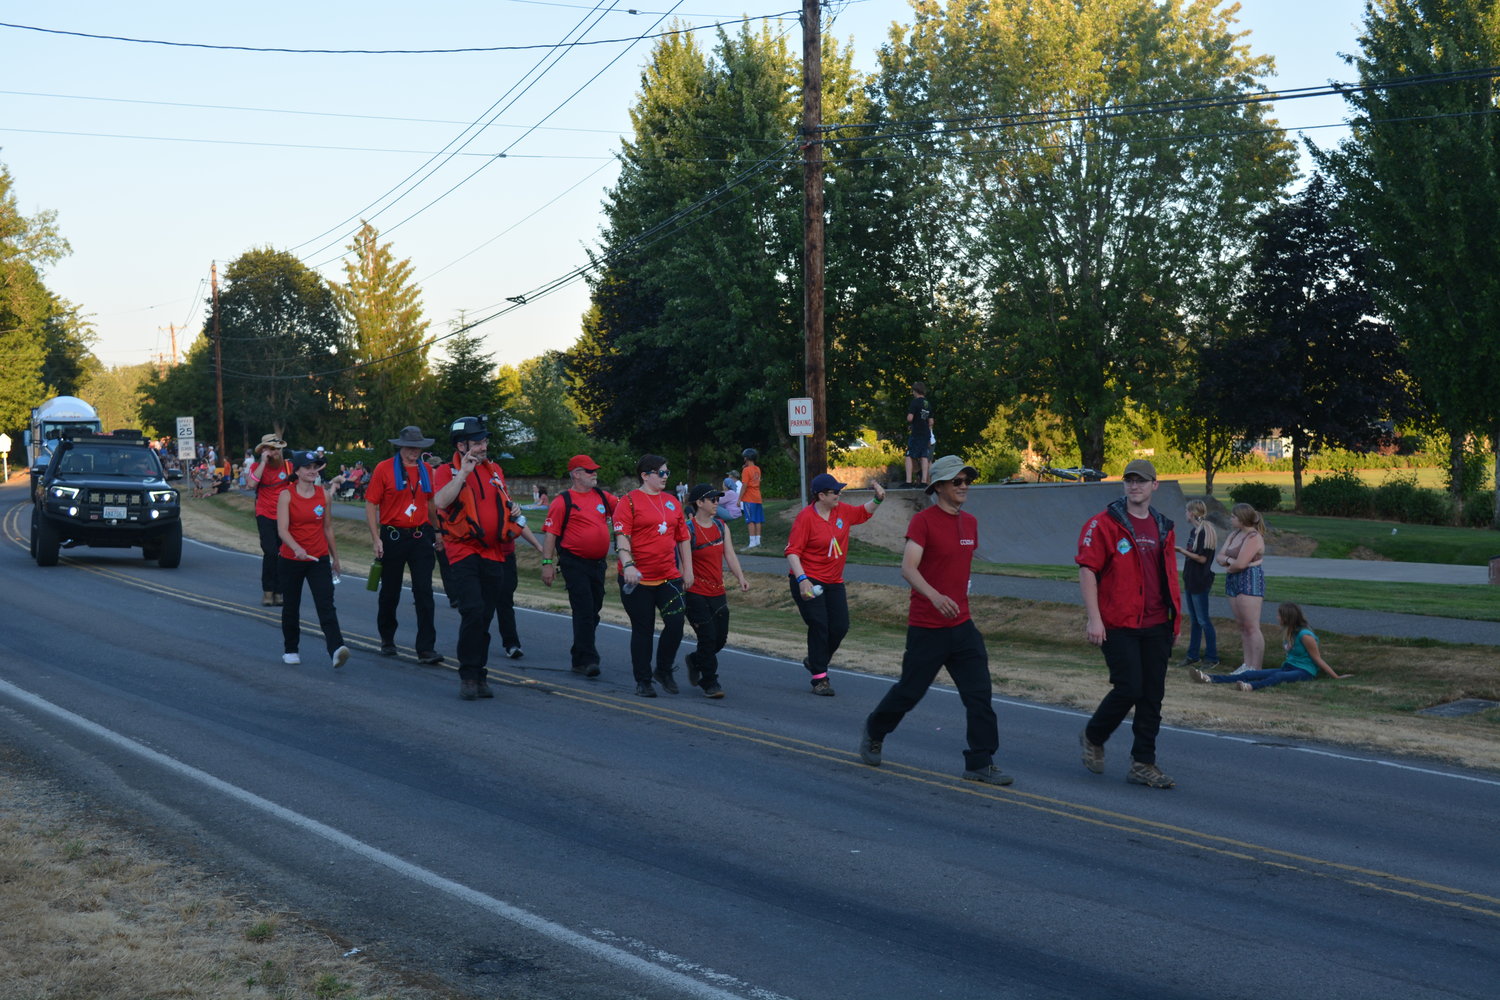 Clark County Search & Rescue members wave to the crowd as they march in the La Center Our Days parade on July 29.